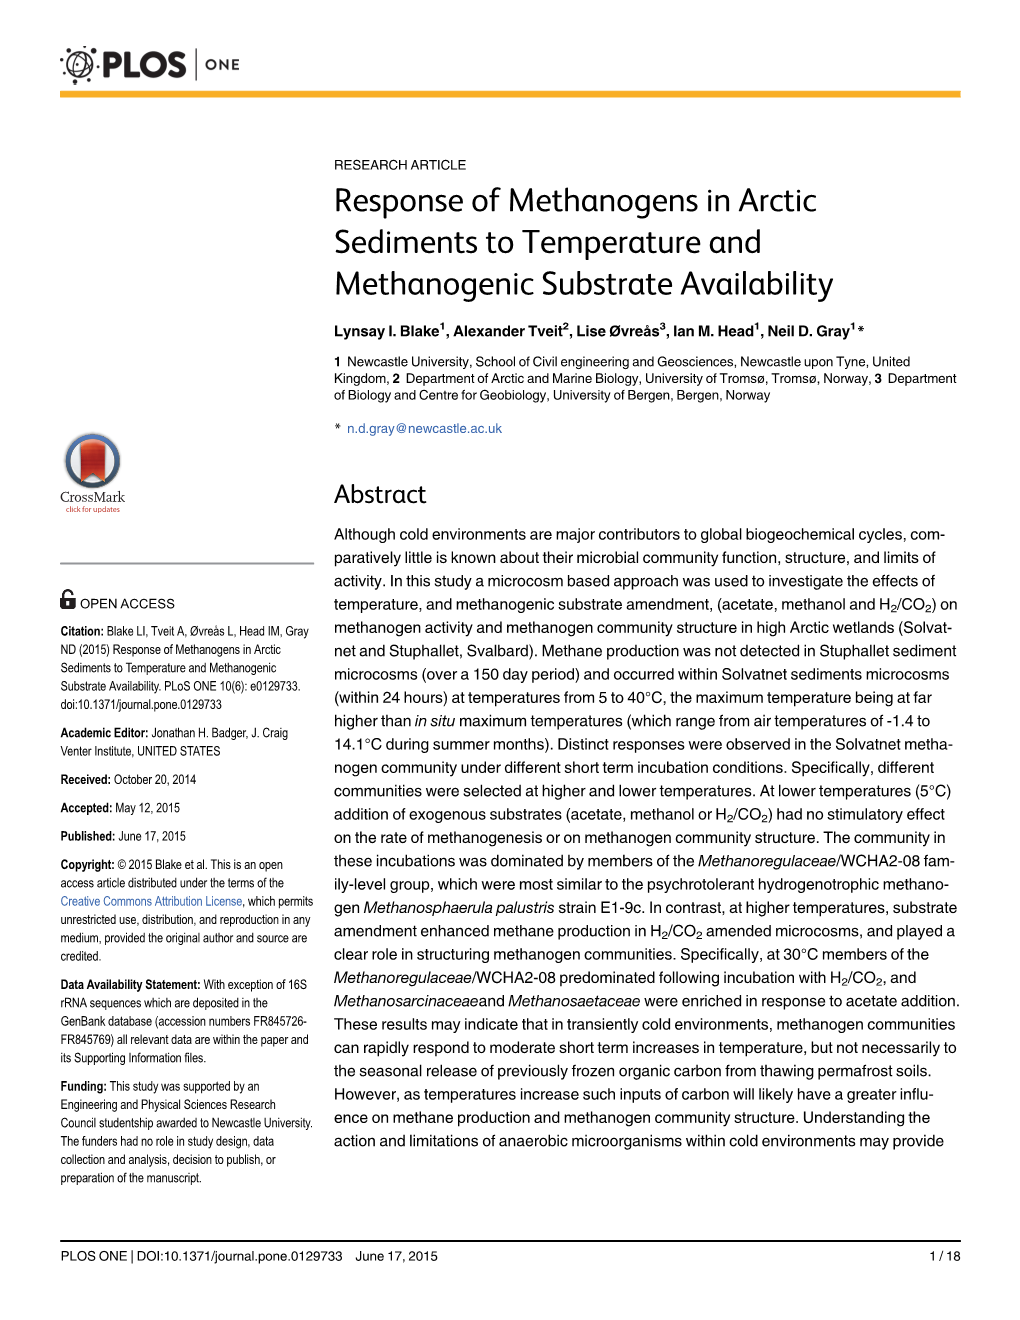 Response of Methanogens in Arctic Sediments to Temperature and Methanogenic Substrate Availability